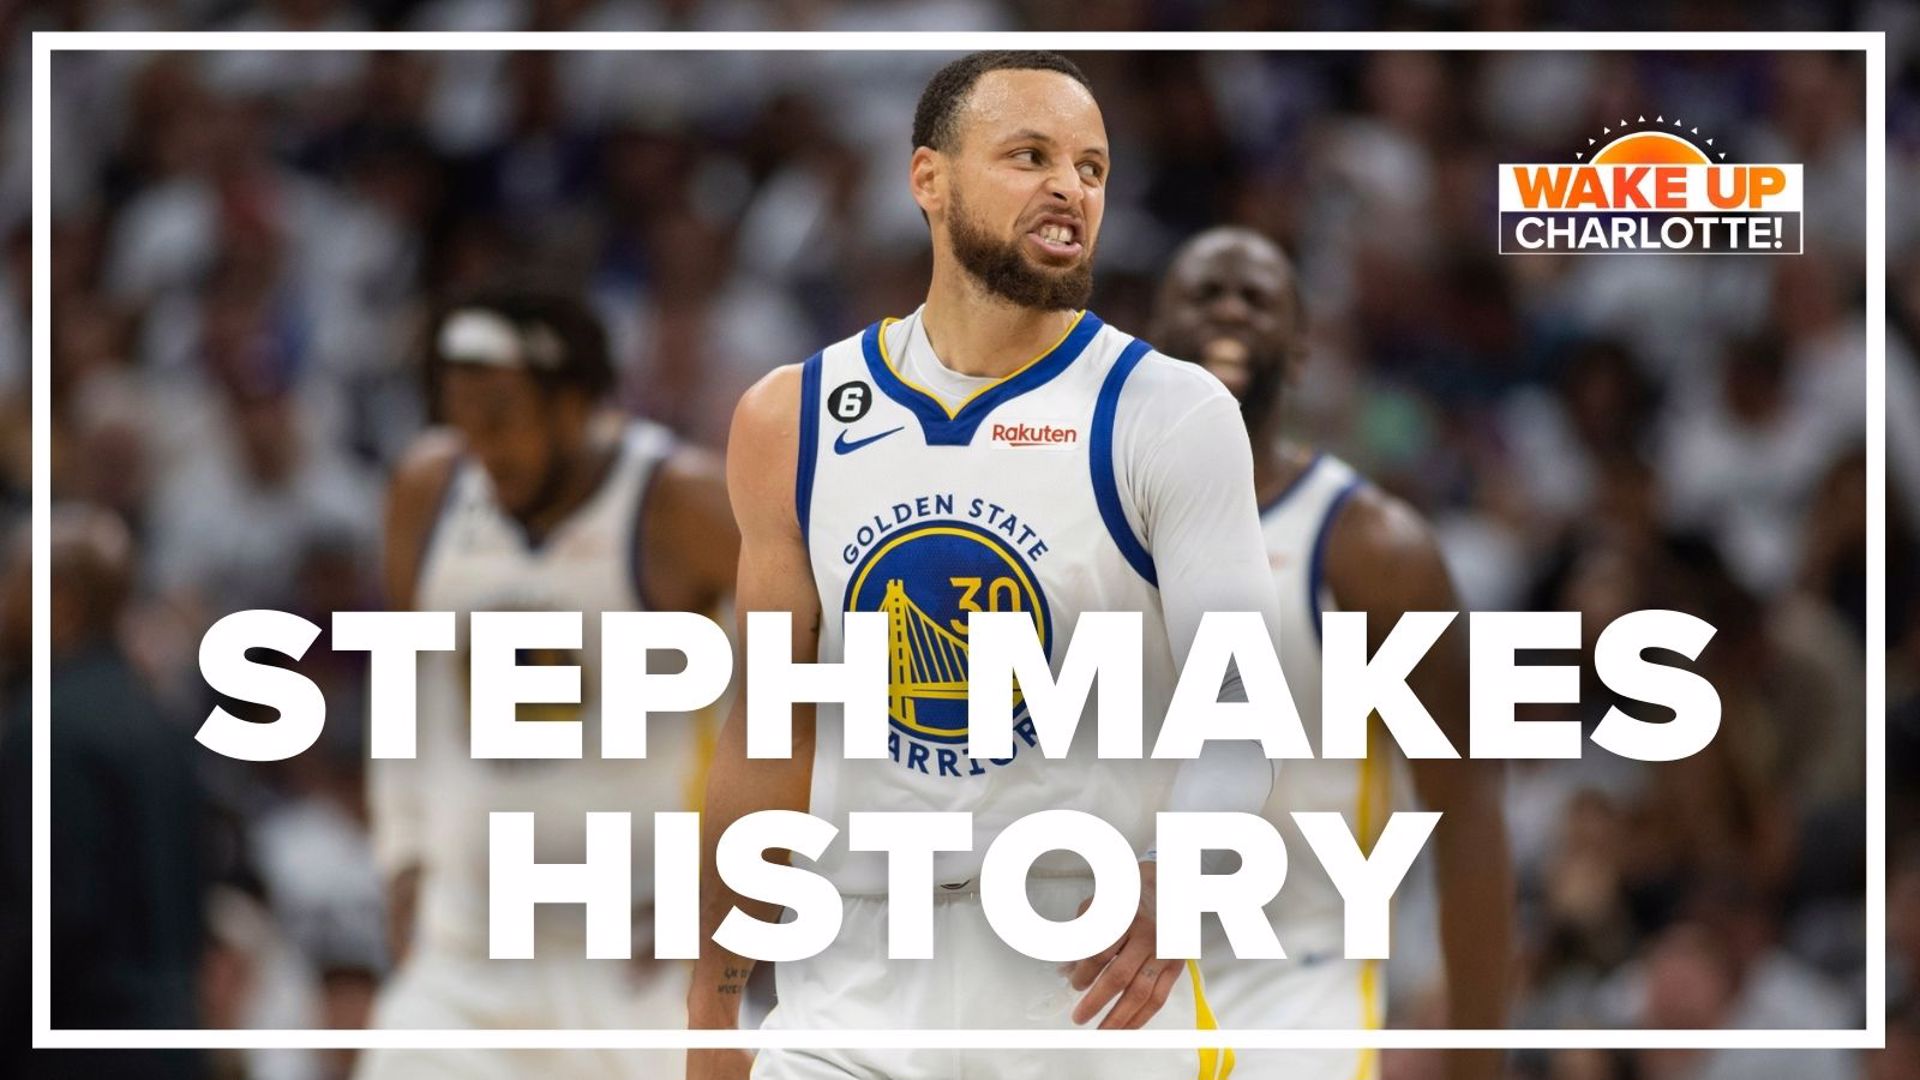 Steph Curry reacts to historic Game 7 performance in NBA Playoffs